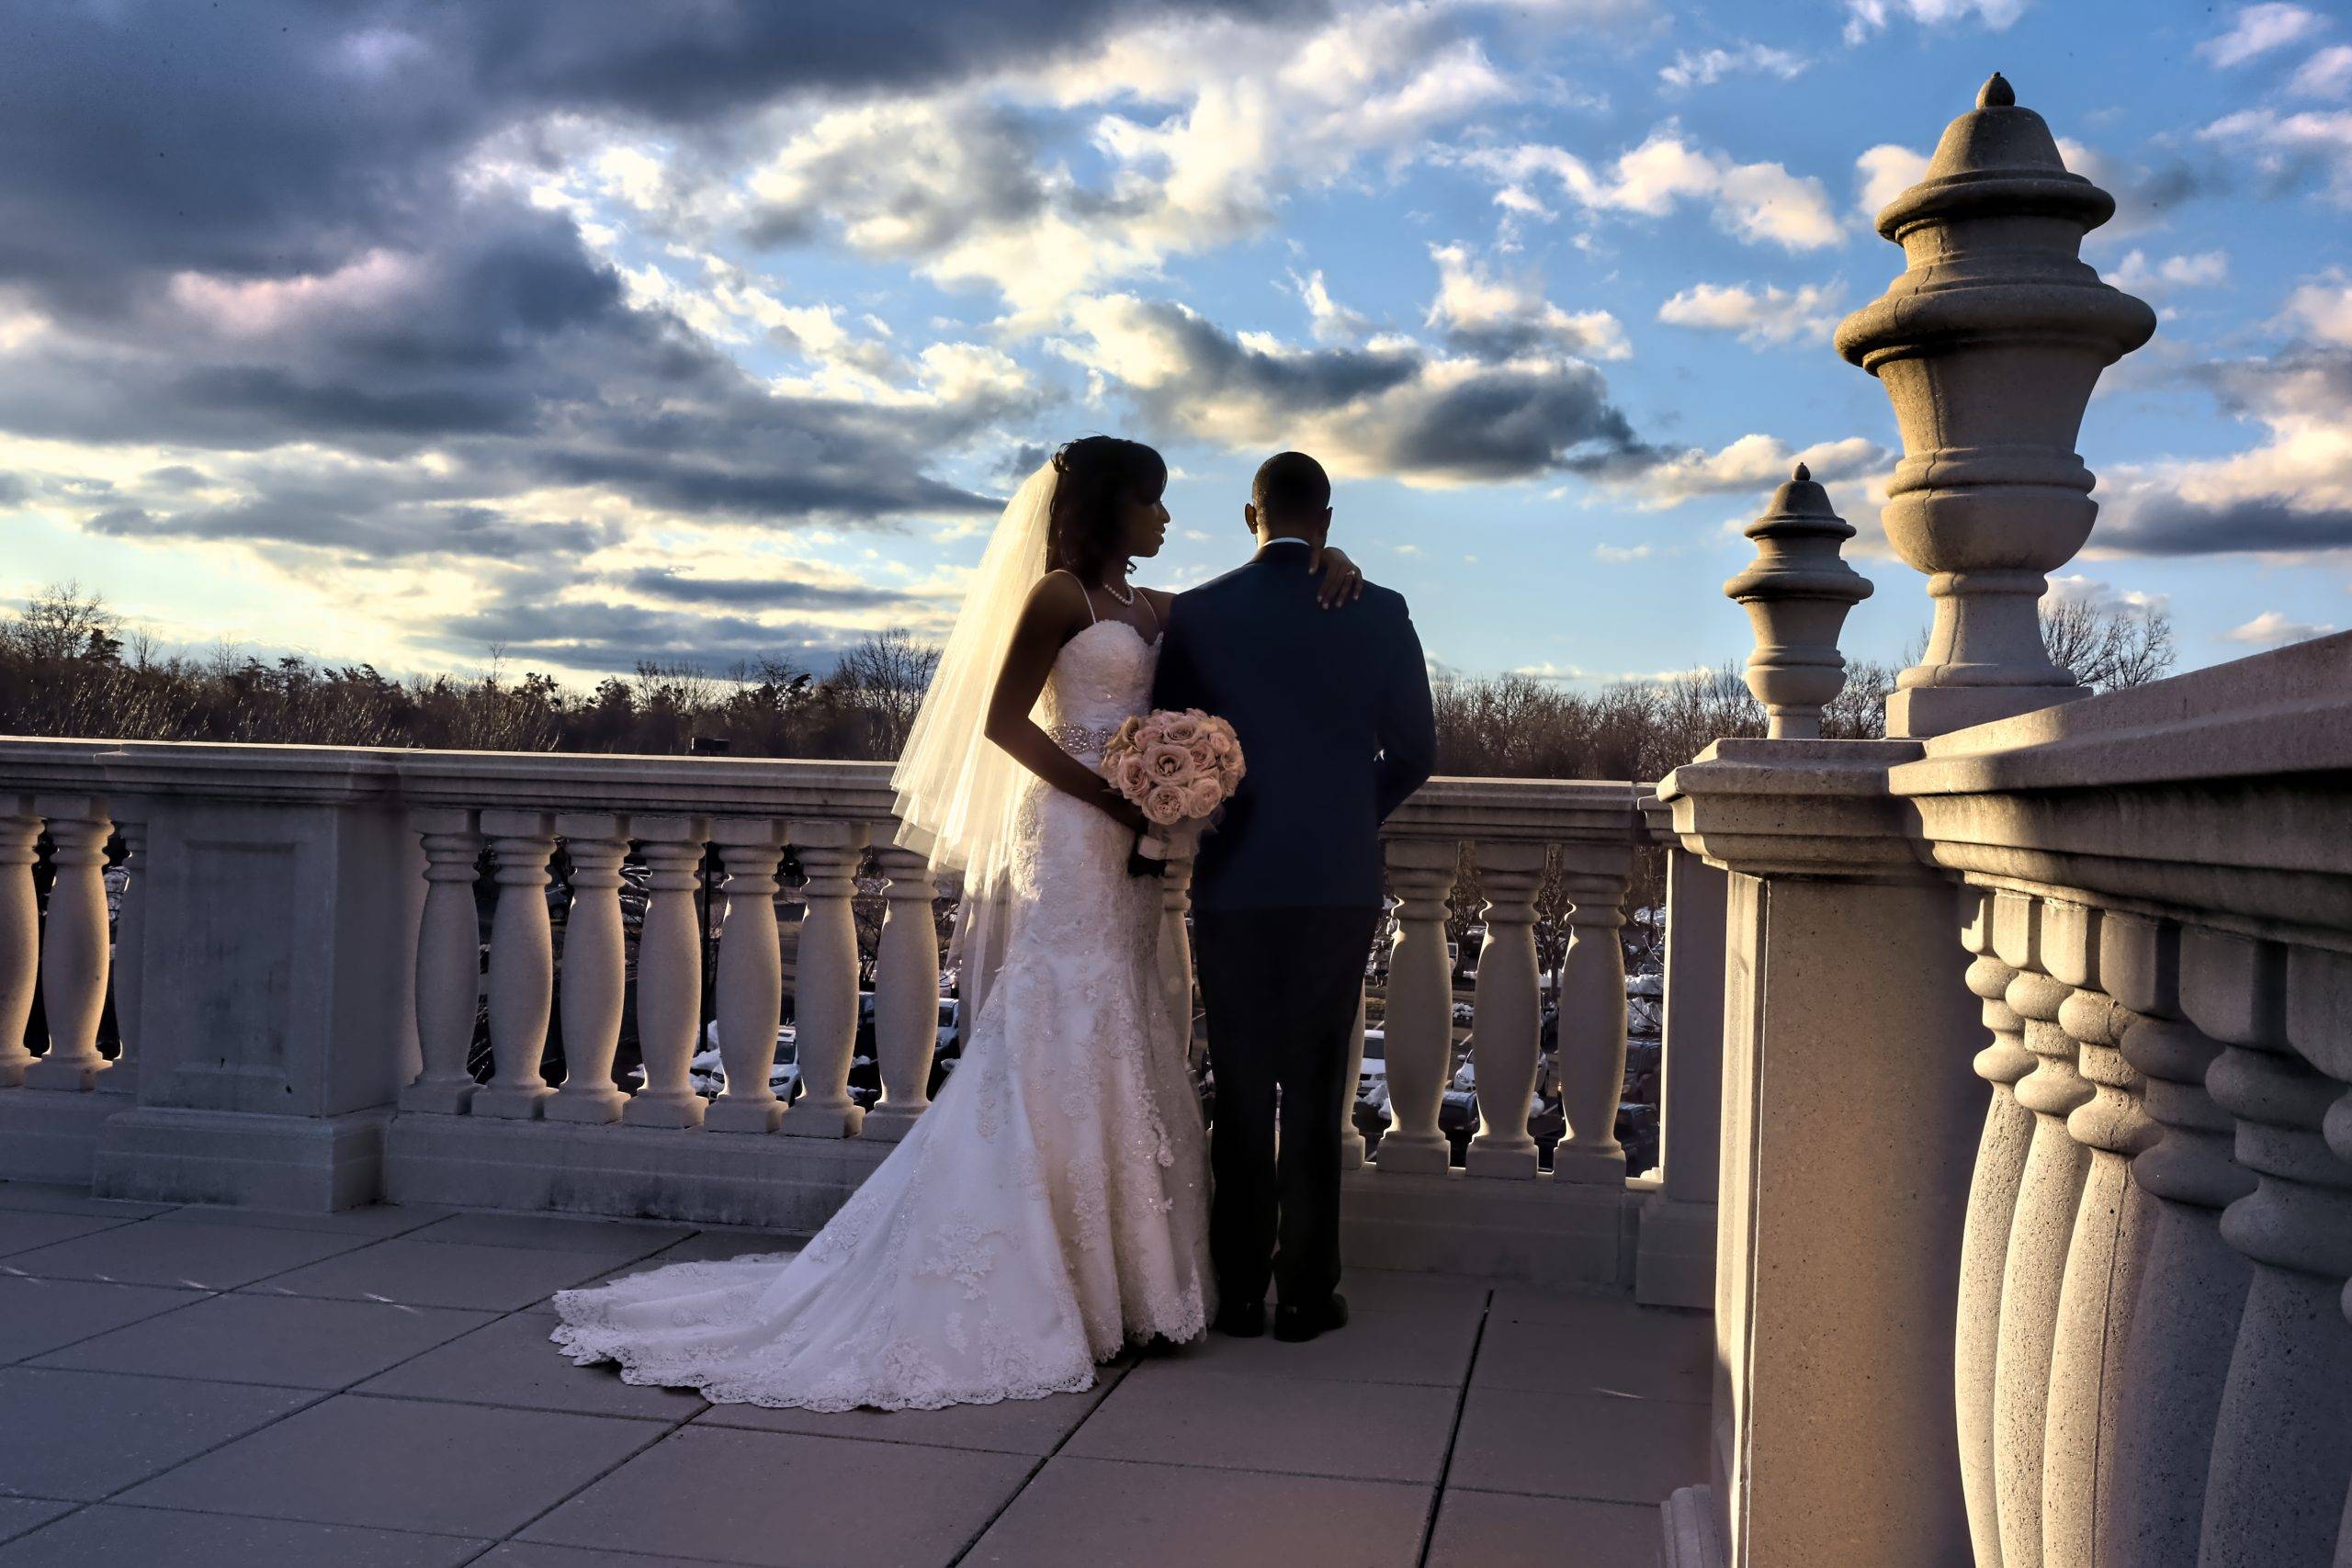 A bride and groom standing on a balcony overlooking the sky.